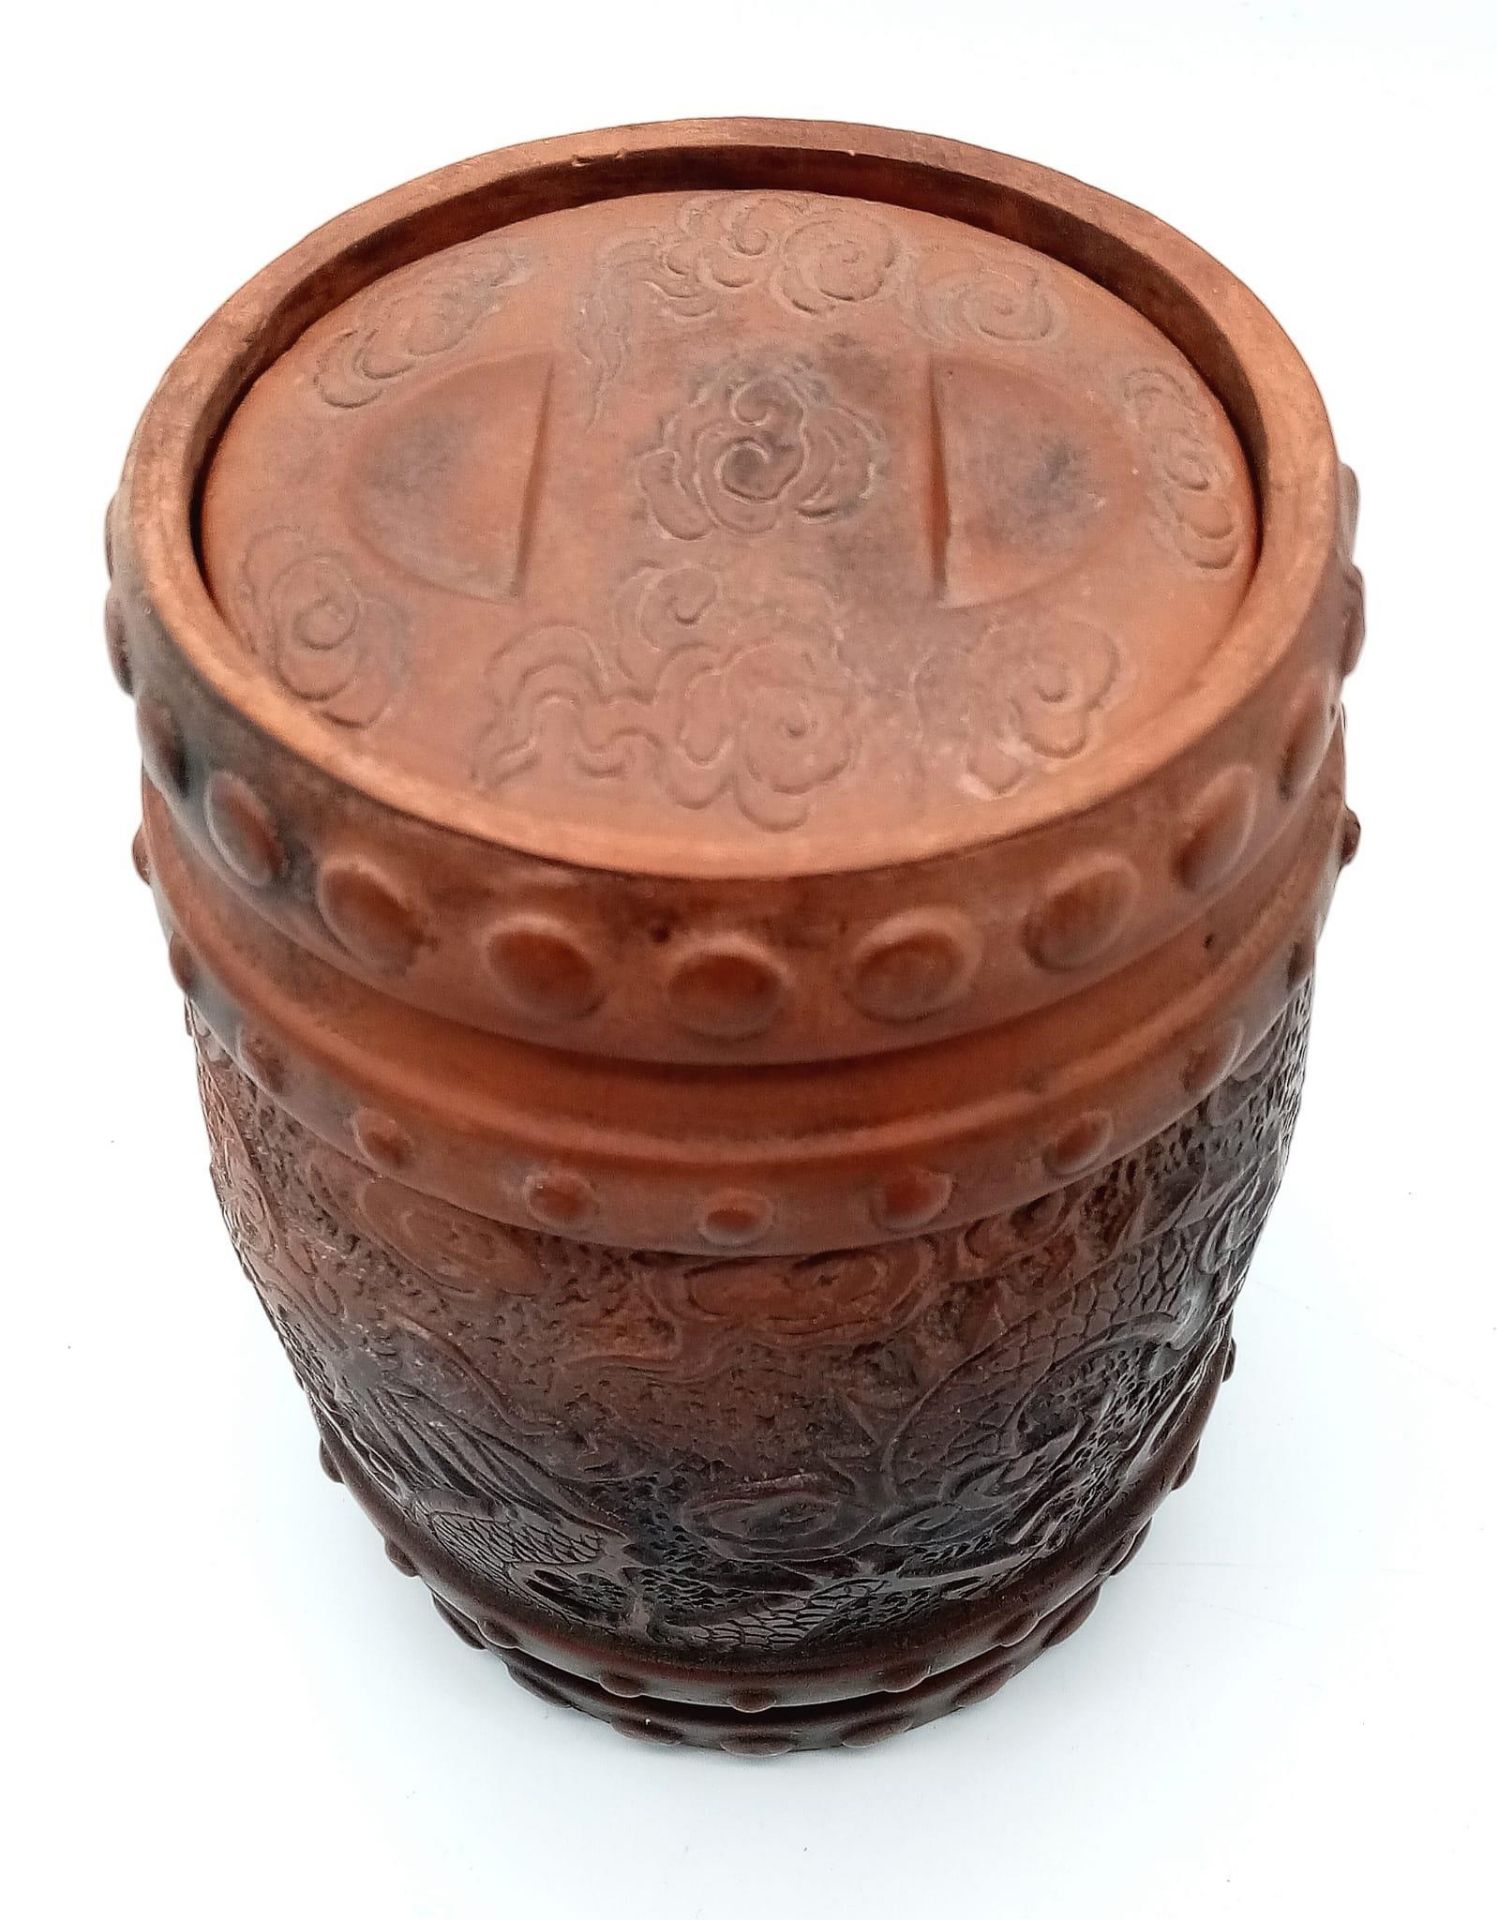 Antique Chinese Yixing Zisha Tea Jar. Beautifully made and inscribed with ancient dragons amongst - Image 2 of 4